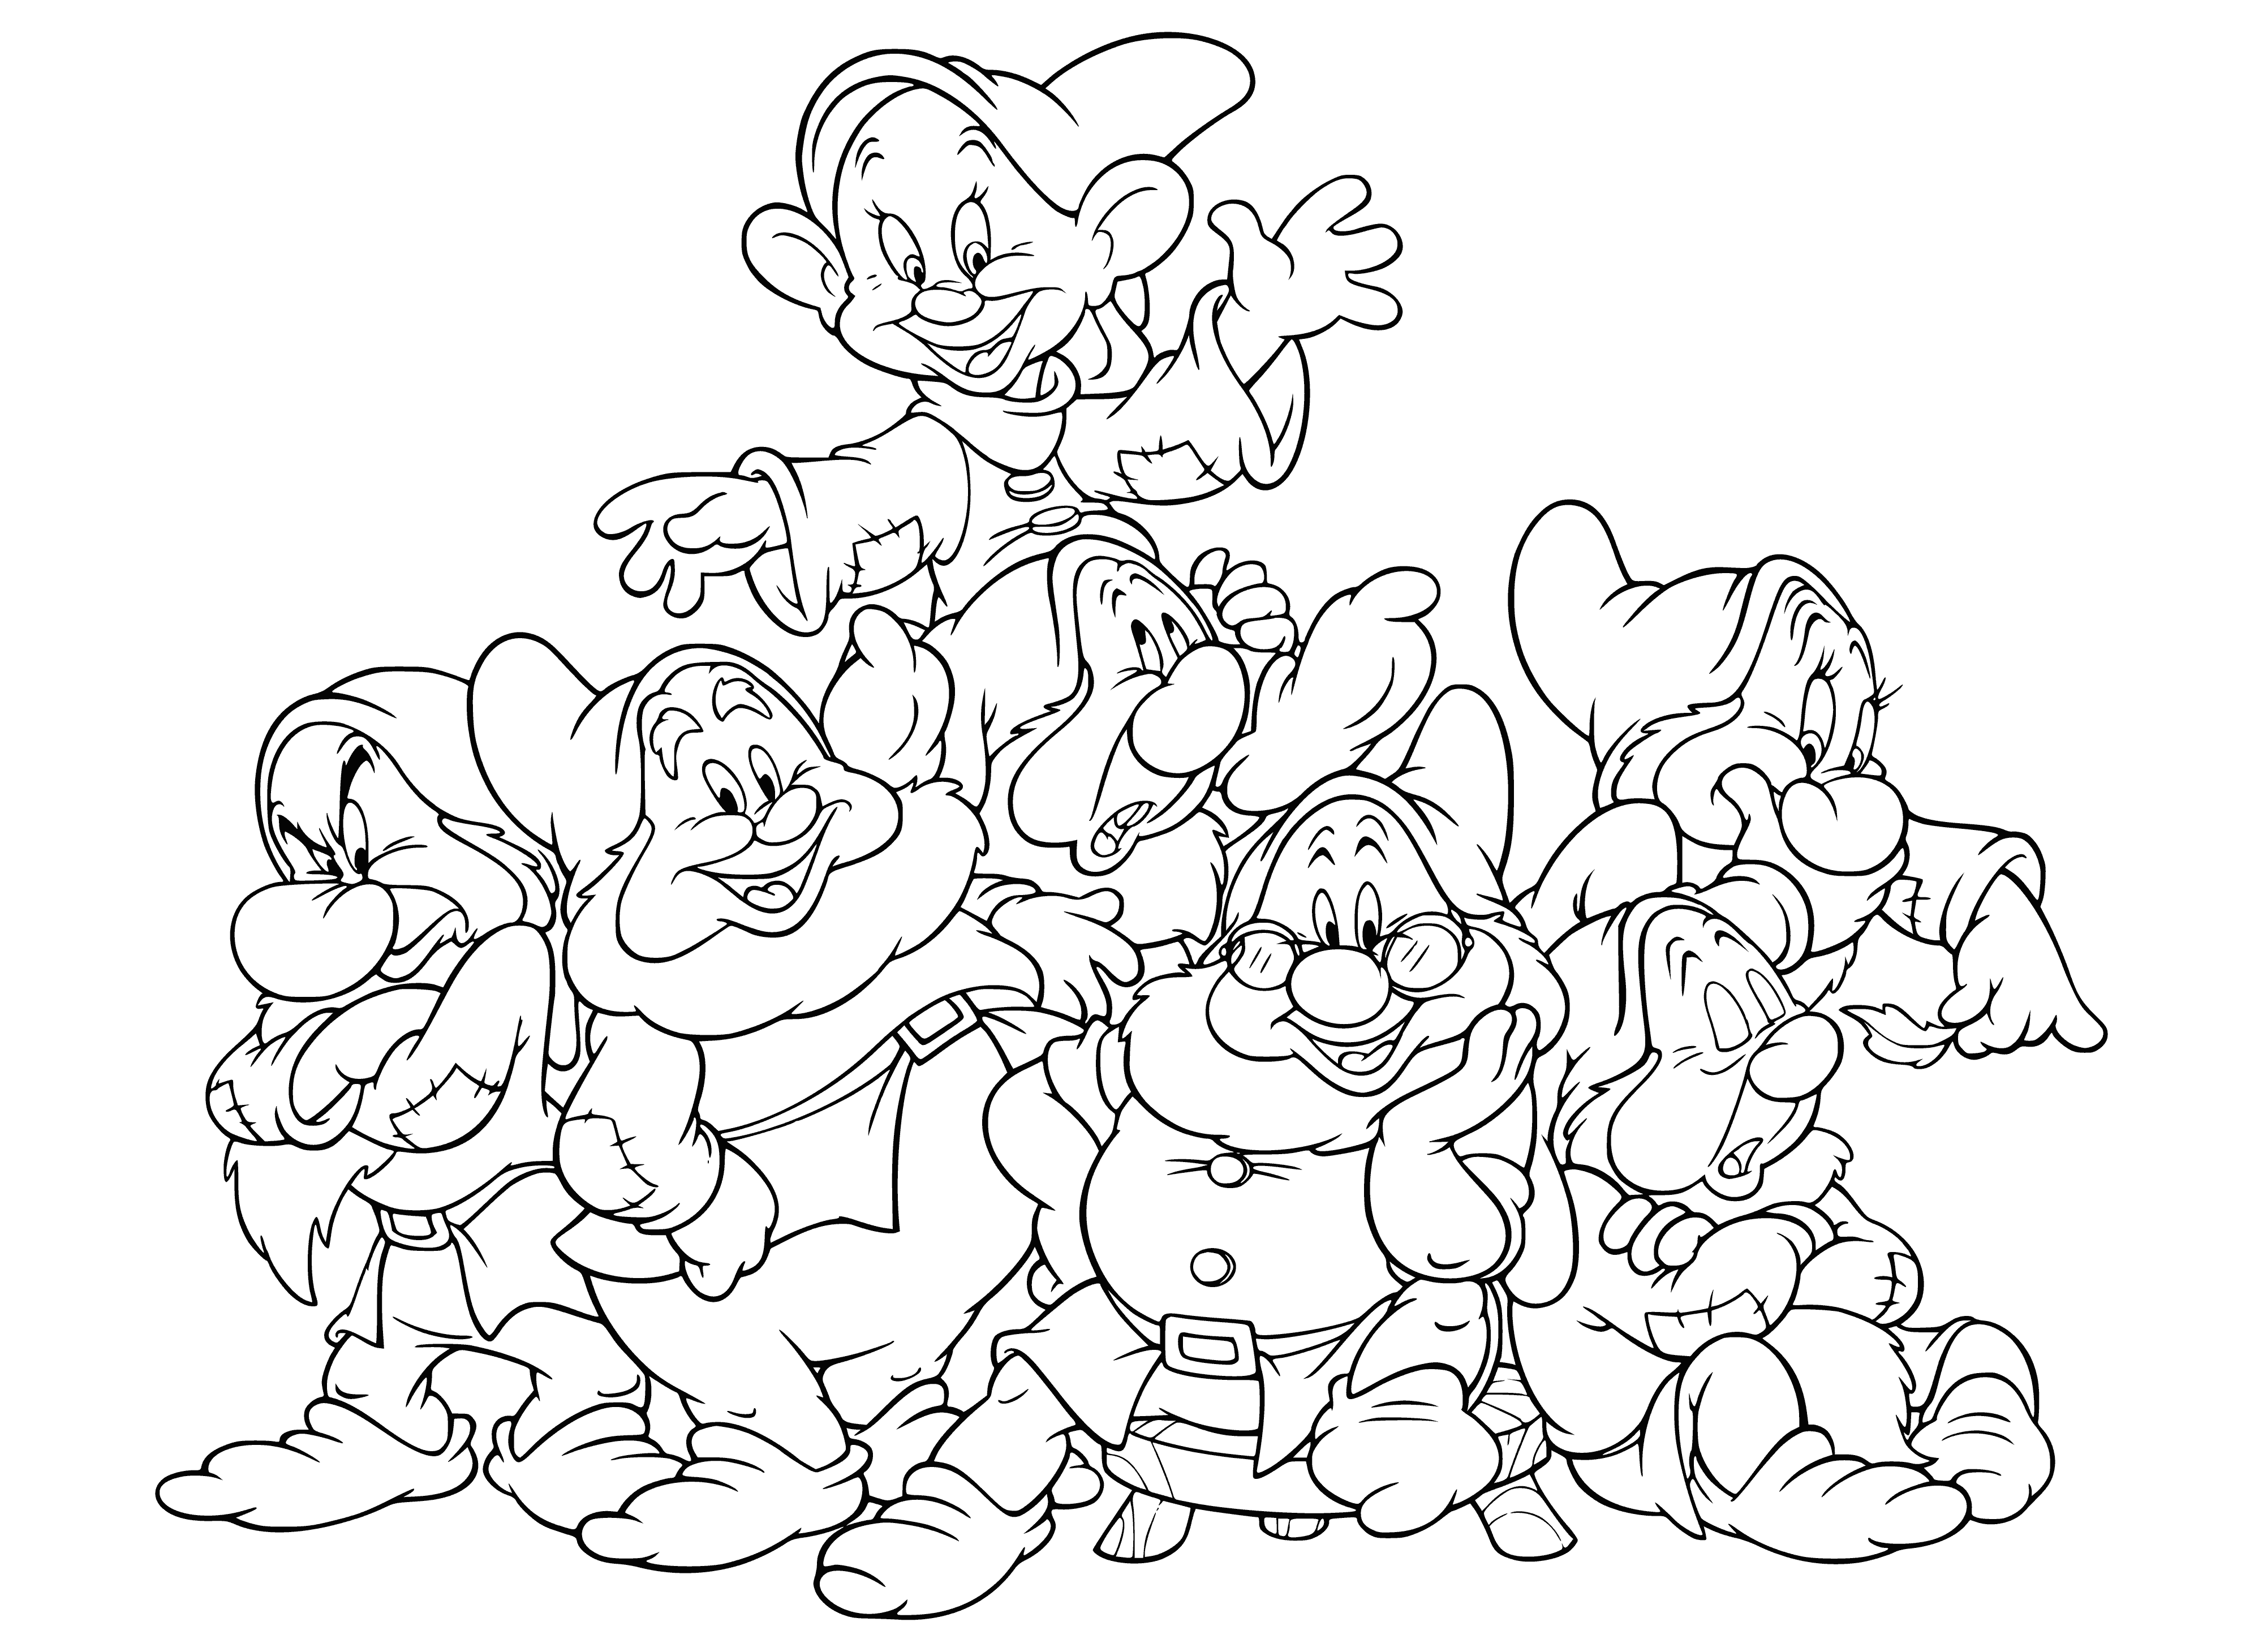 coloring page: Seven dwarves, of various heights and bearded faces, are shown in a line on a coloring page. They each have a different colored shirt and hat, and seem to be looking at something in the distance.